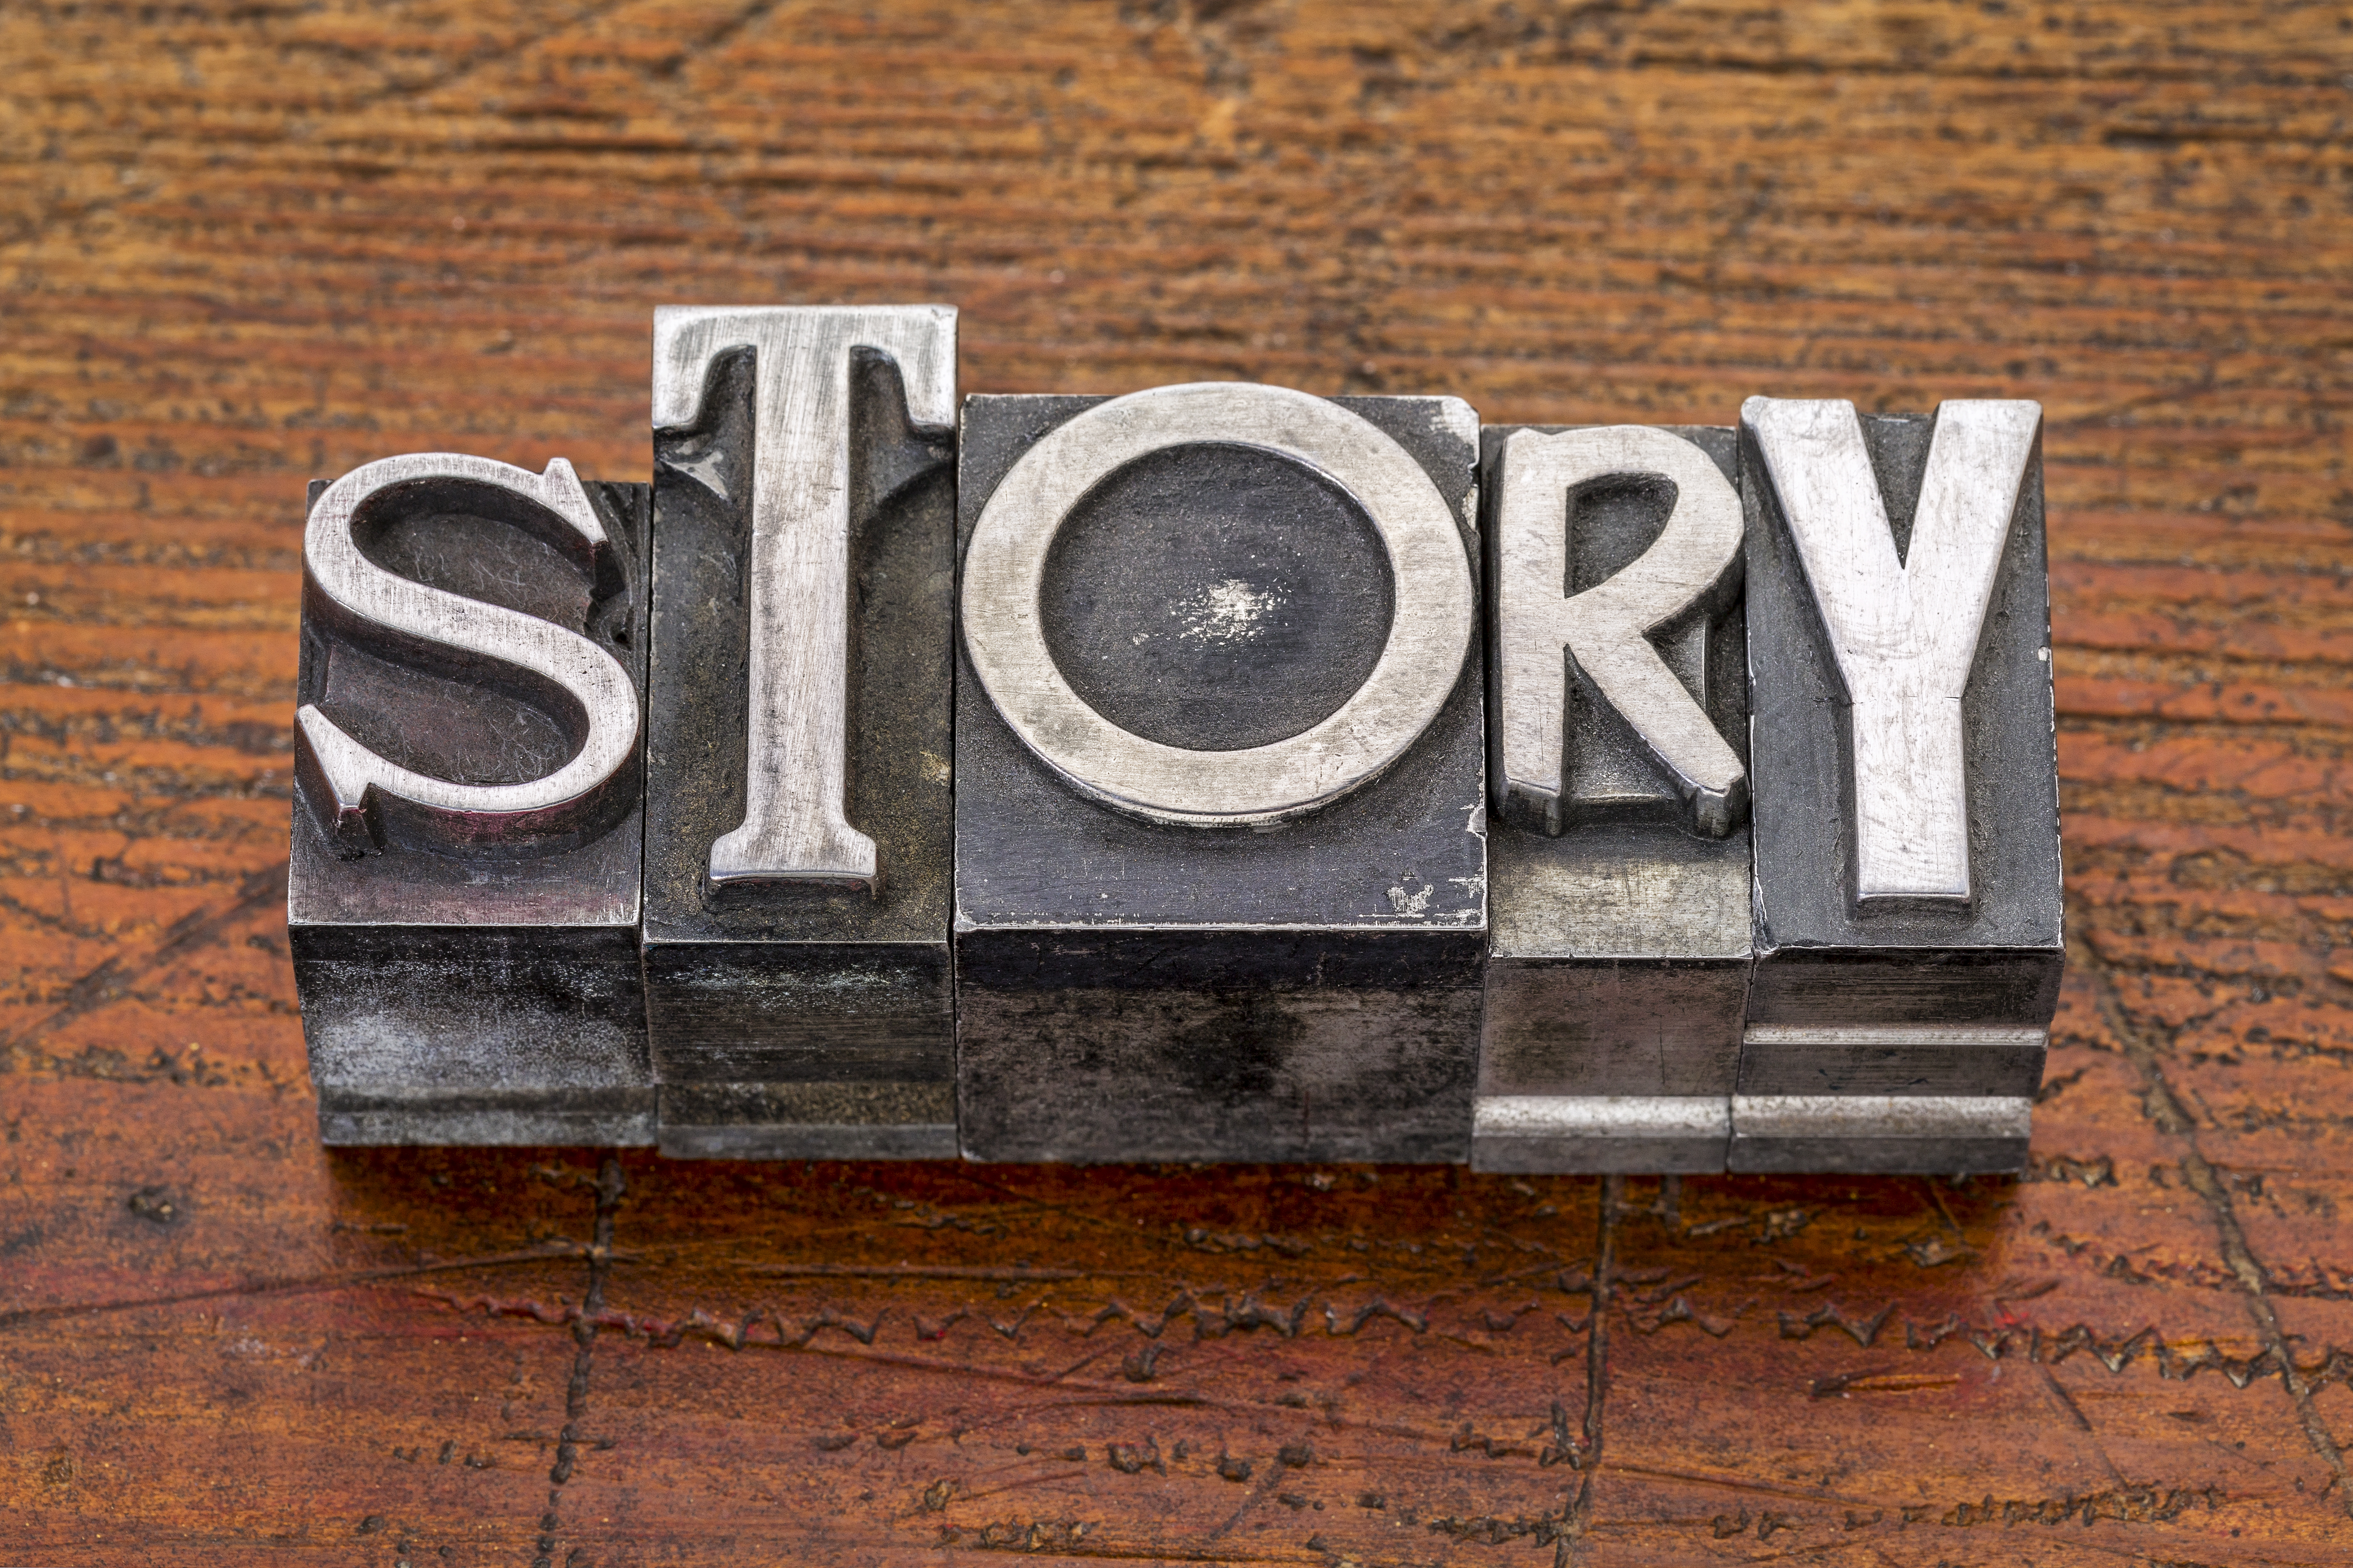 What’s your narrative? Stories worth telling.